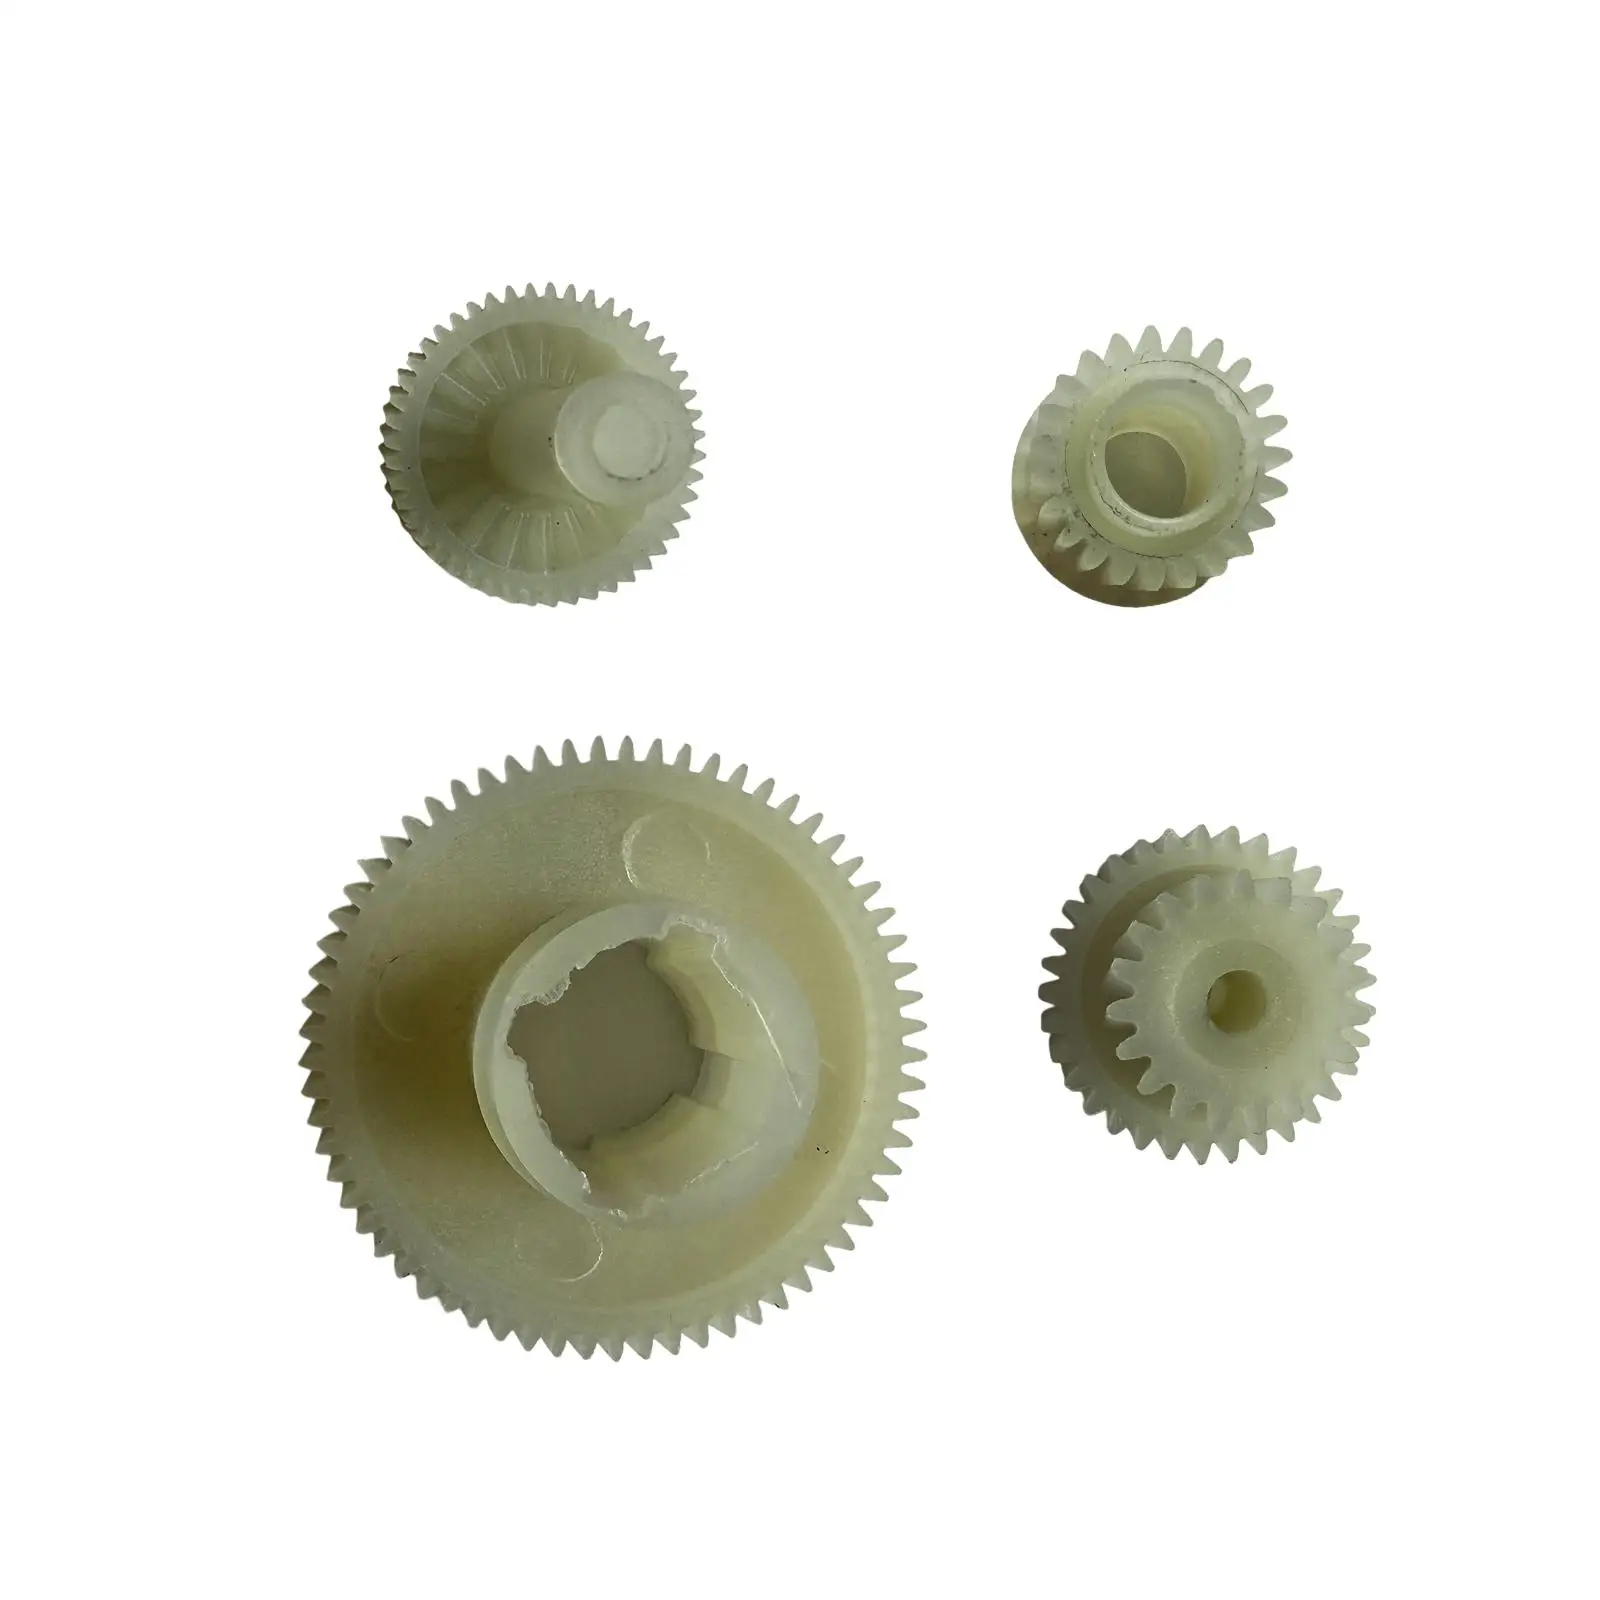 Parking Brake Actuator Repair Gears Durable Directly Replace High Quality for Land Rover Discovery 3 4 Range Rover Sport